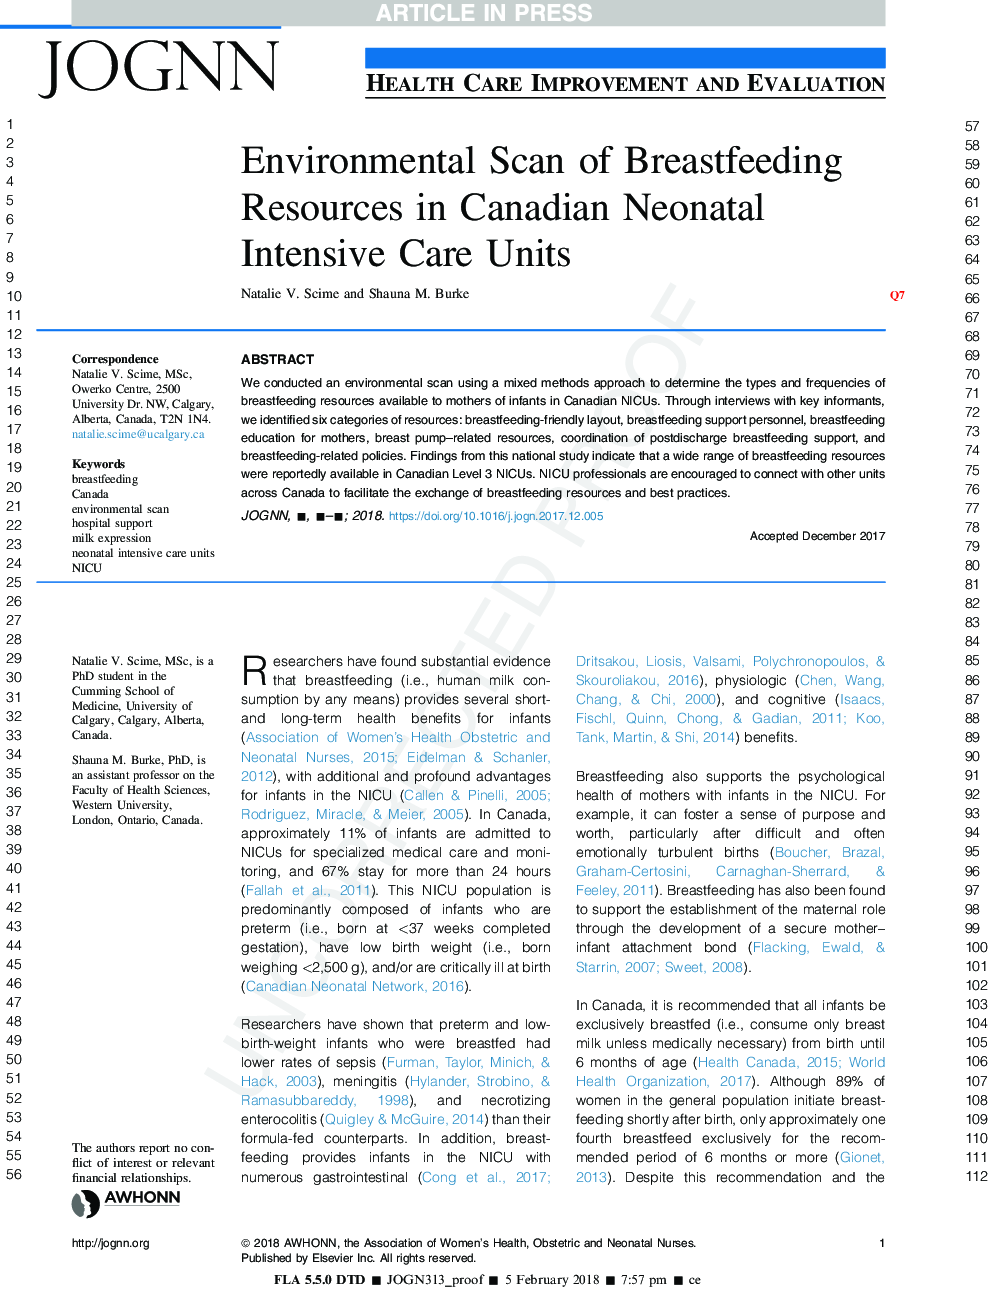 Environmental Scan of Breastfeeding Resources in Canadian NICUs